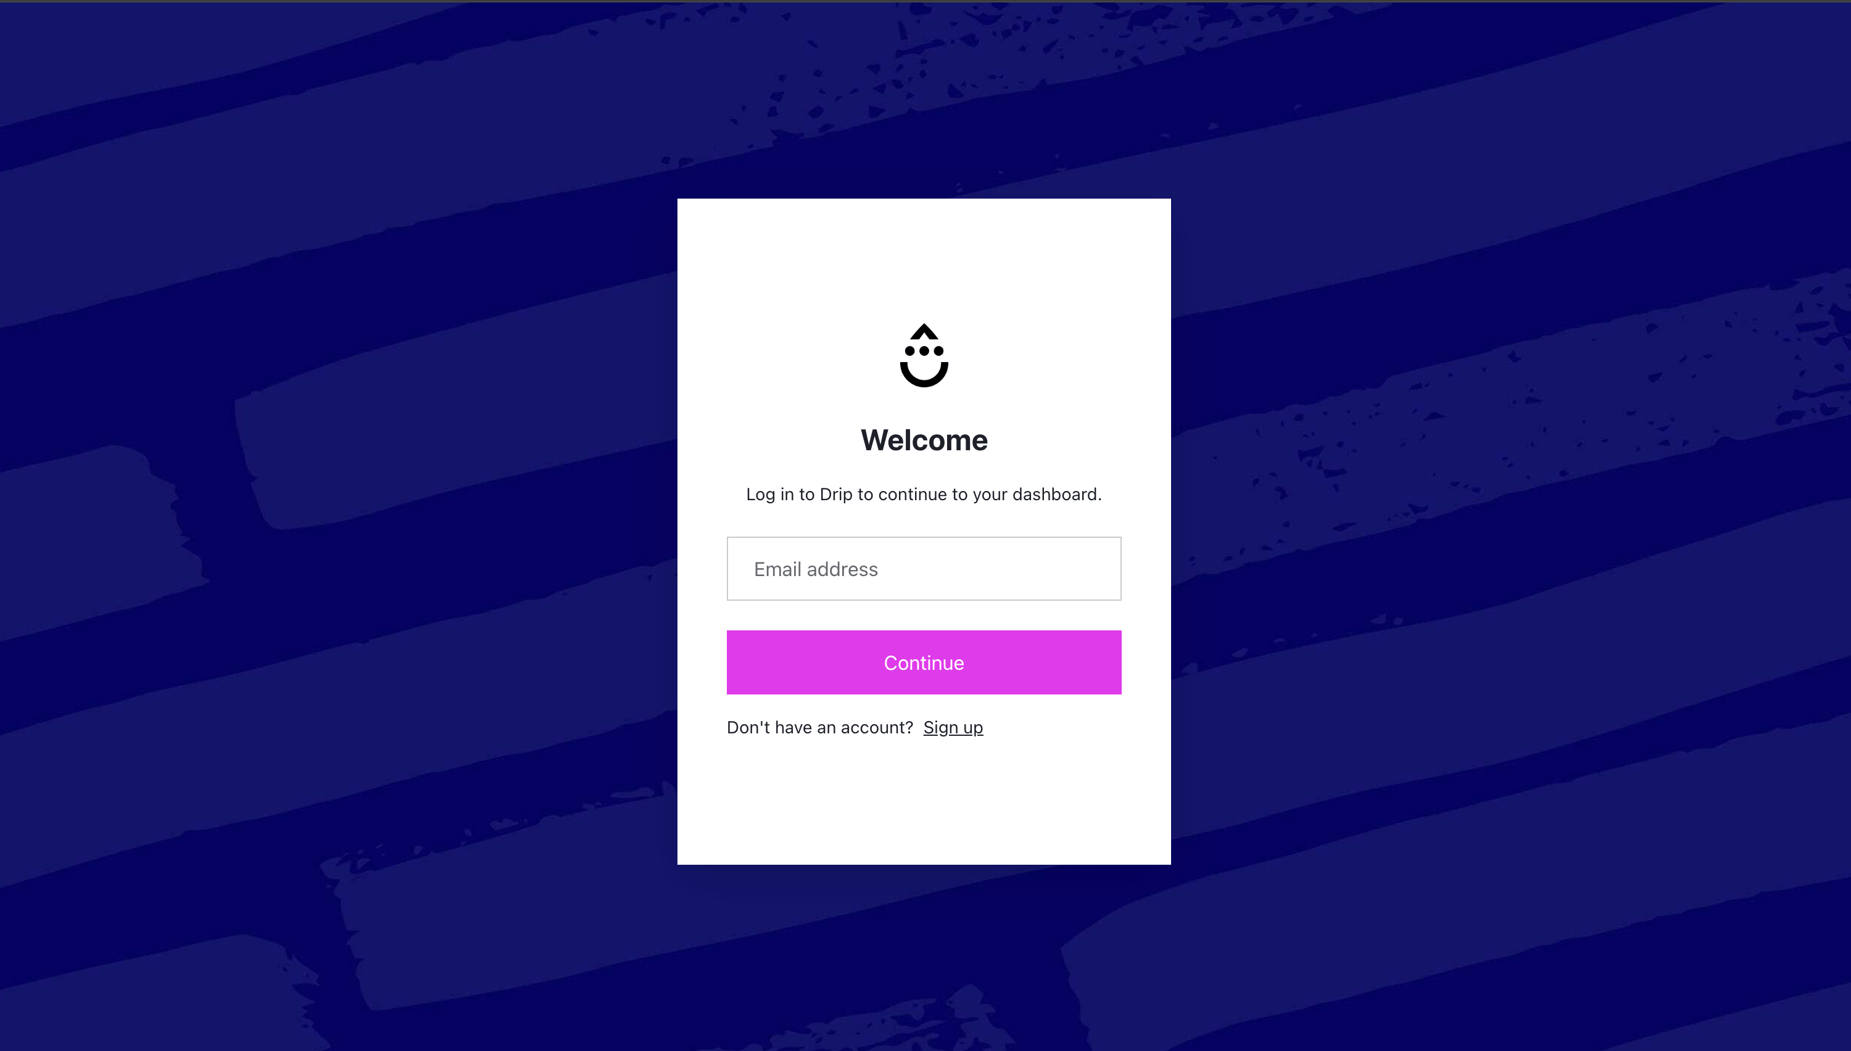 Drip's authentication page